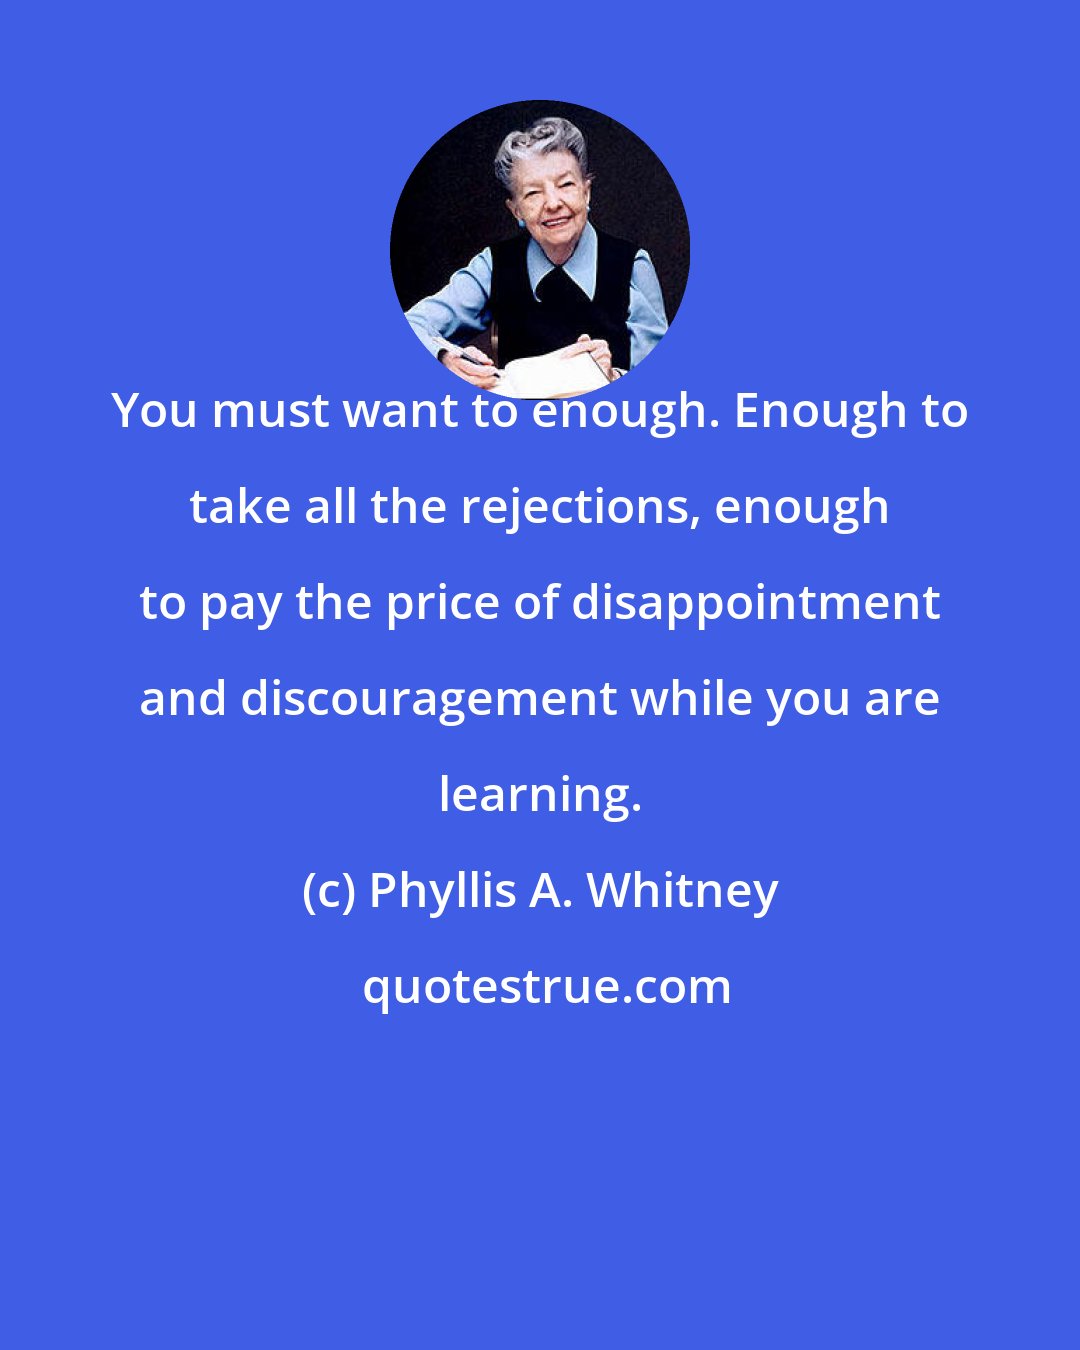 Phyllis A. Whitney: You must want to enough. Enough to take all the rejections, enough to pay the price of disappointment and discouragement while you are learning.